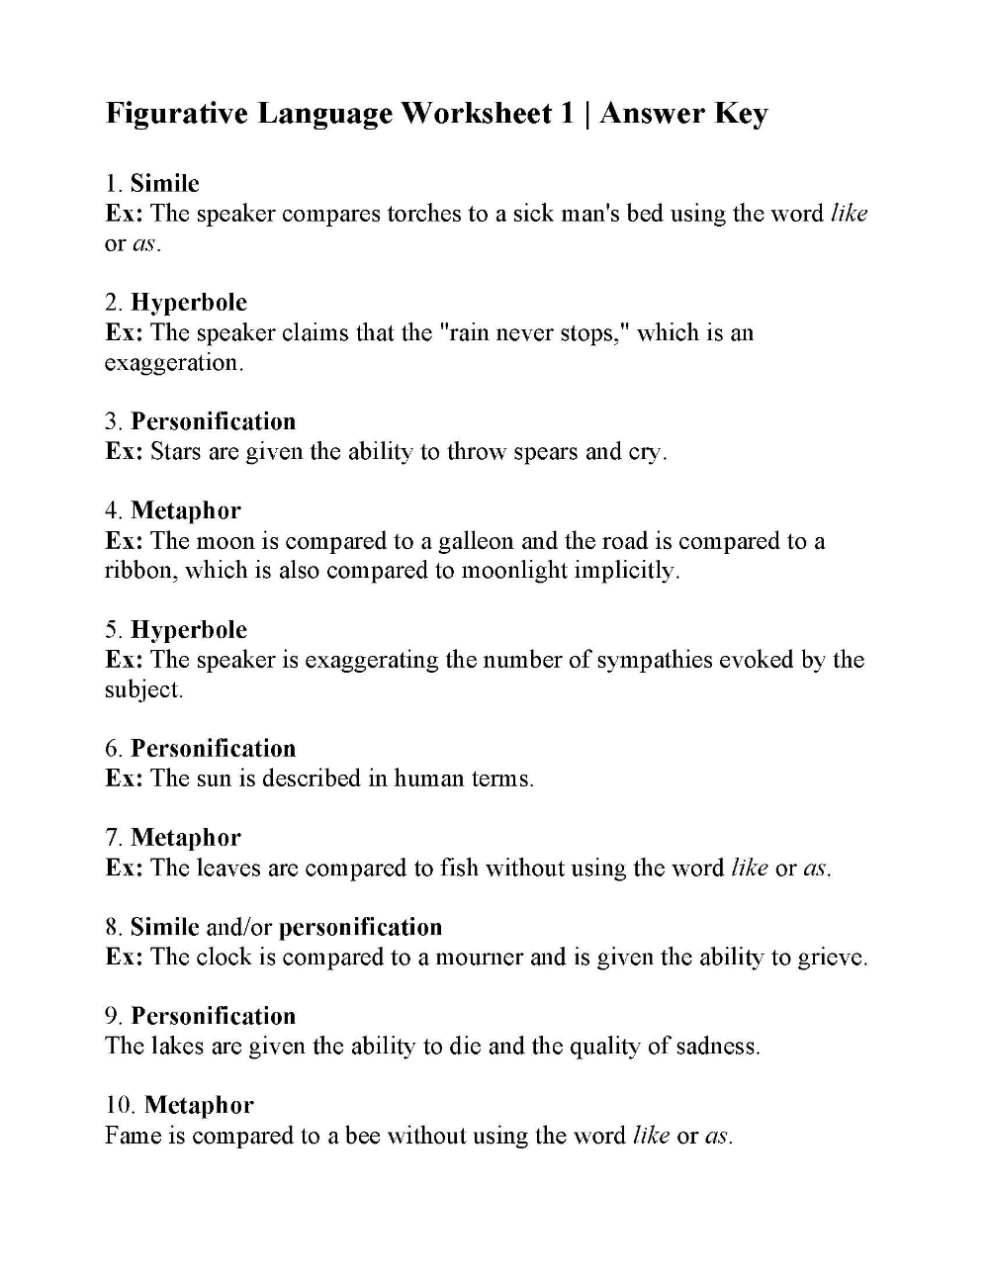 7th Grade Figurative Language Worksheets With Answers